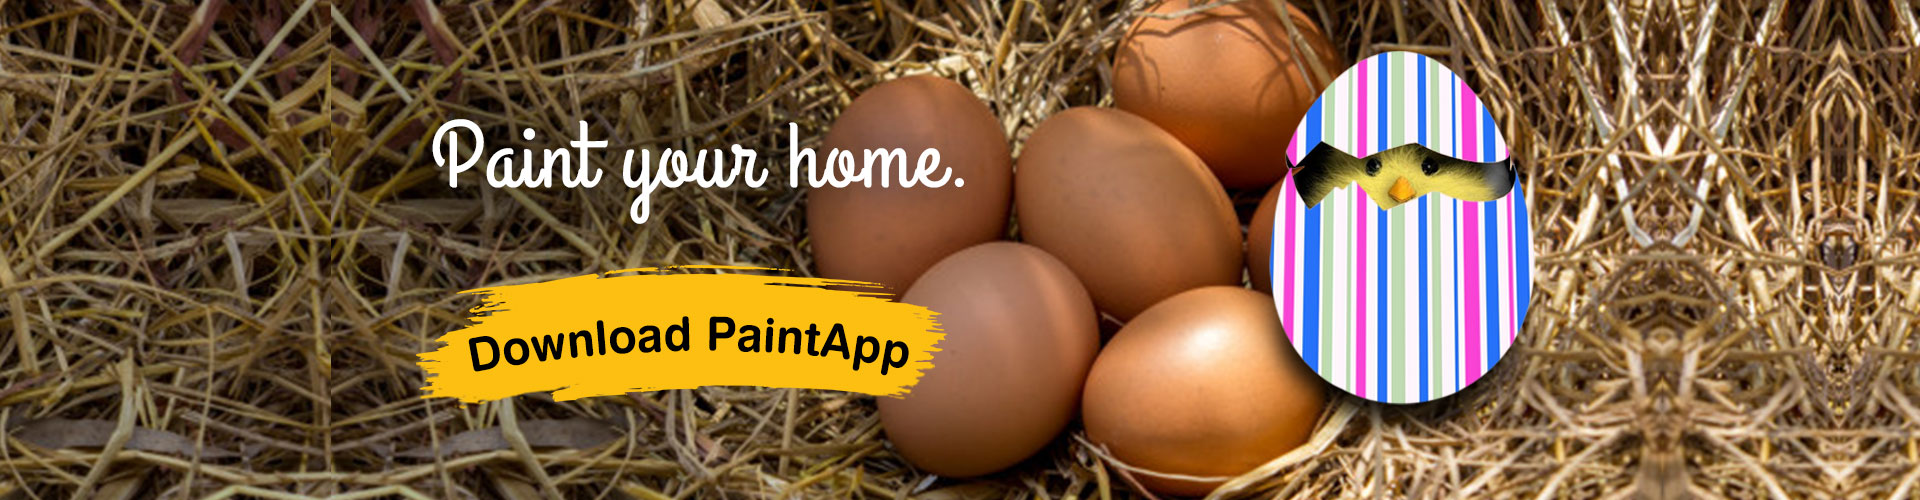 painappit painting services app